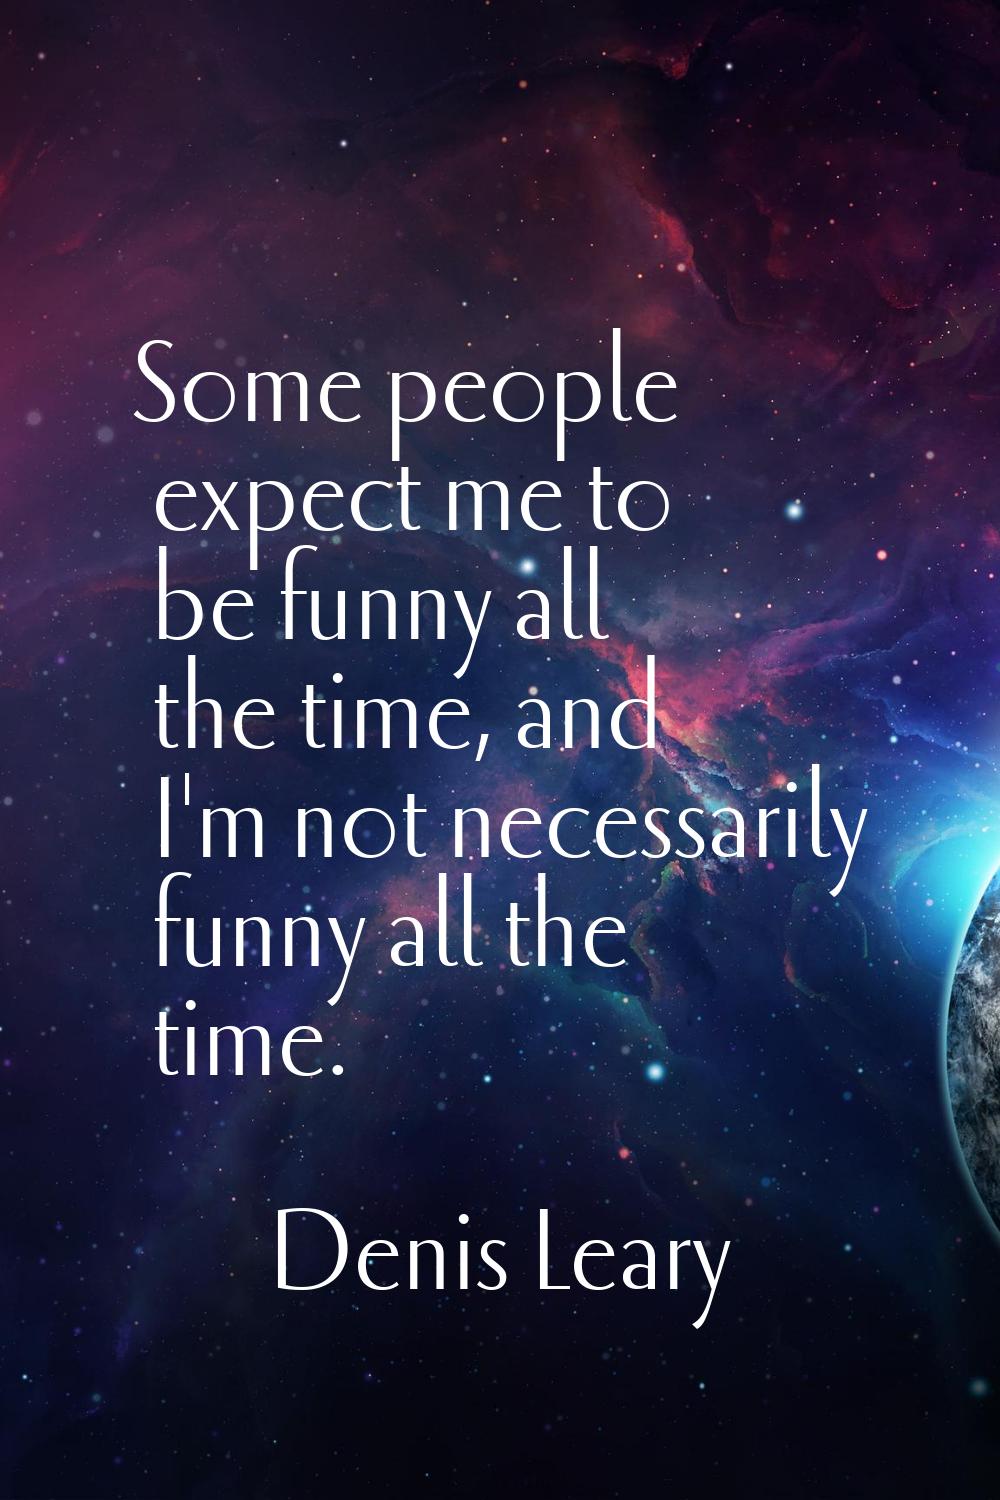 Some people expect me to be funny all the time, and I'm not necessarily funny all the time.